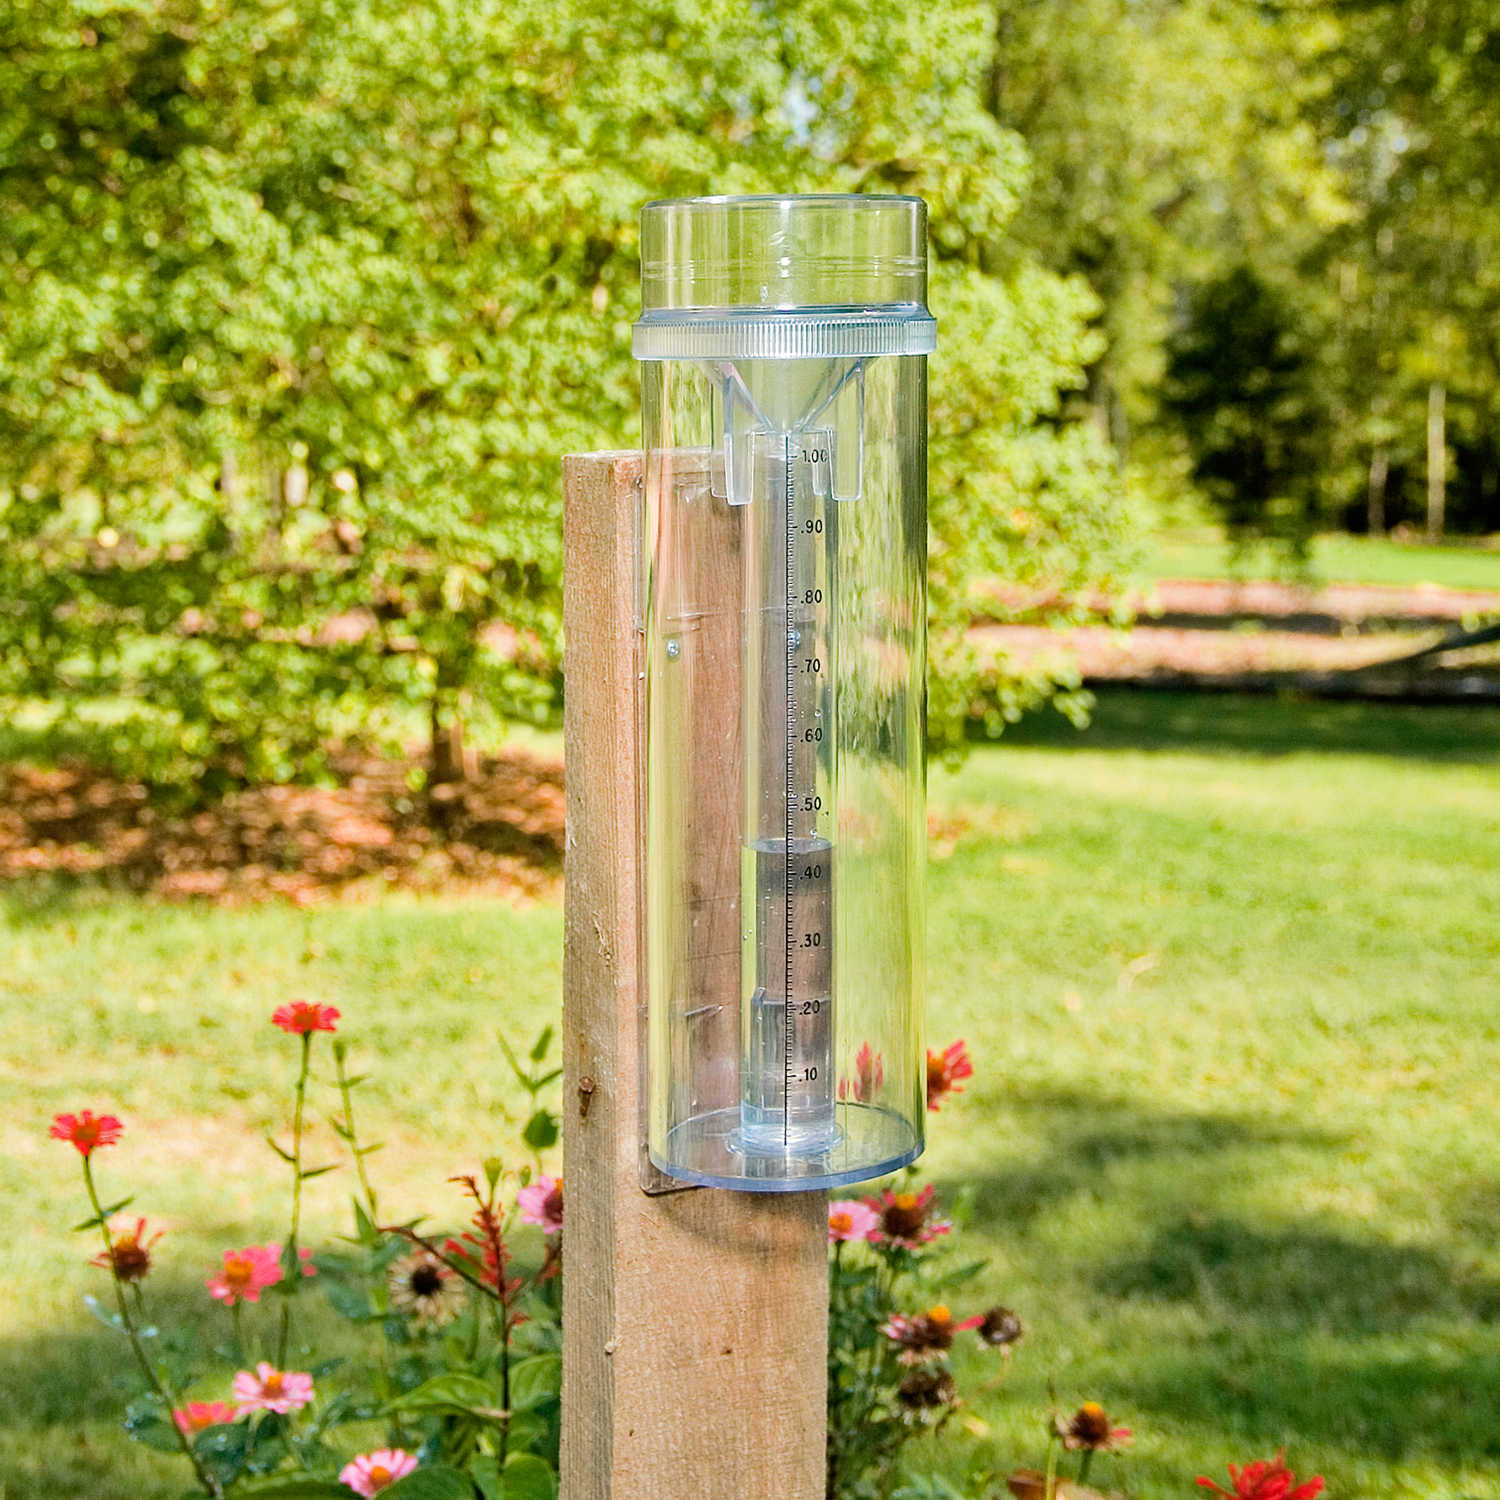 14 All Weather Precision Rain Gauge with Mounting Bracket Heat and frost resistant 